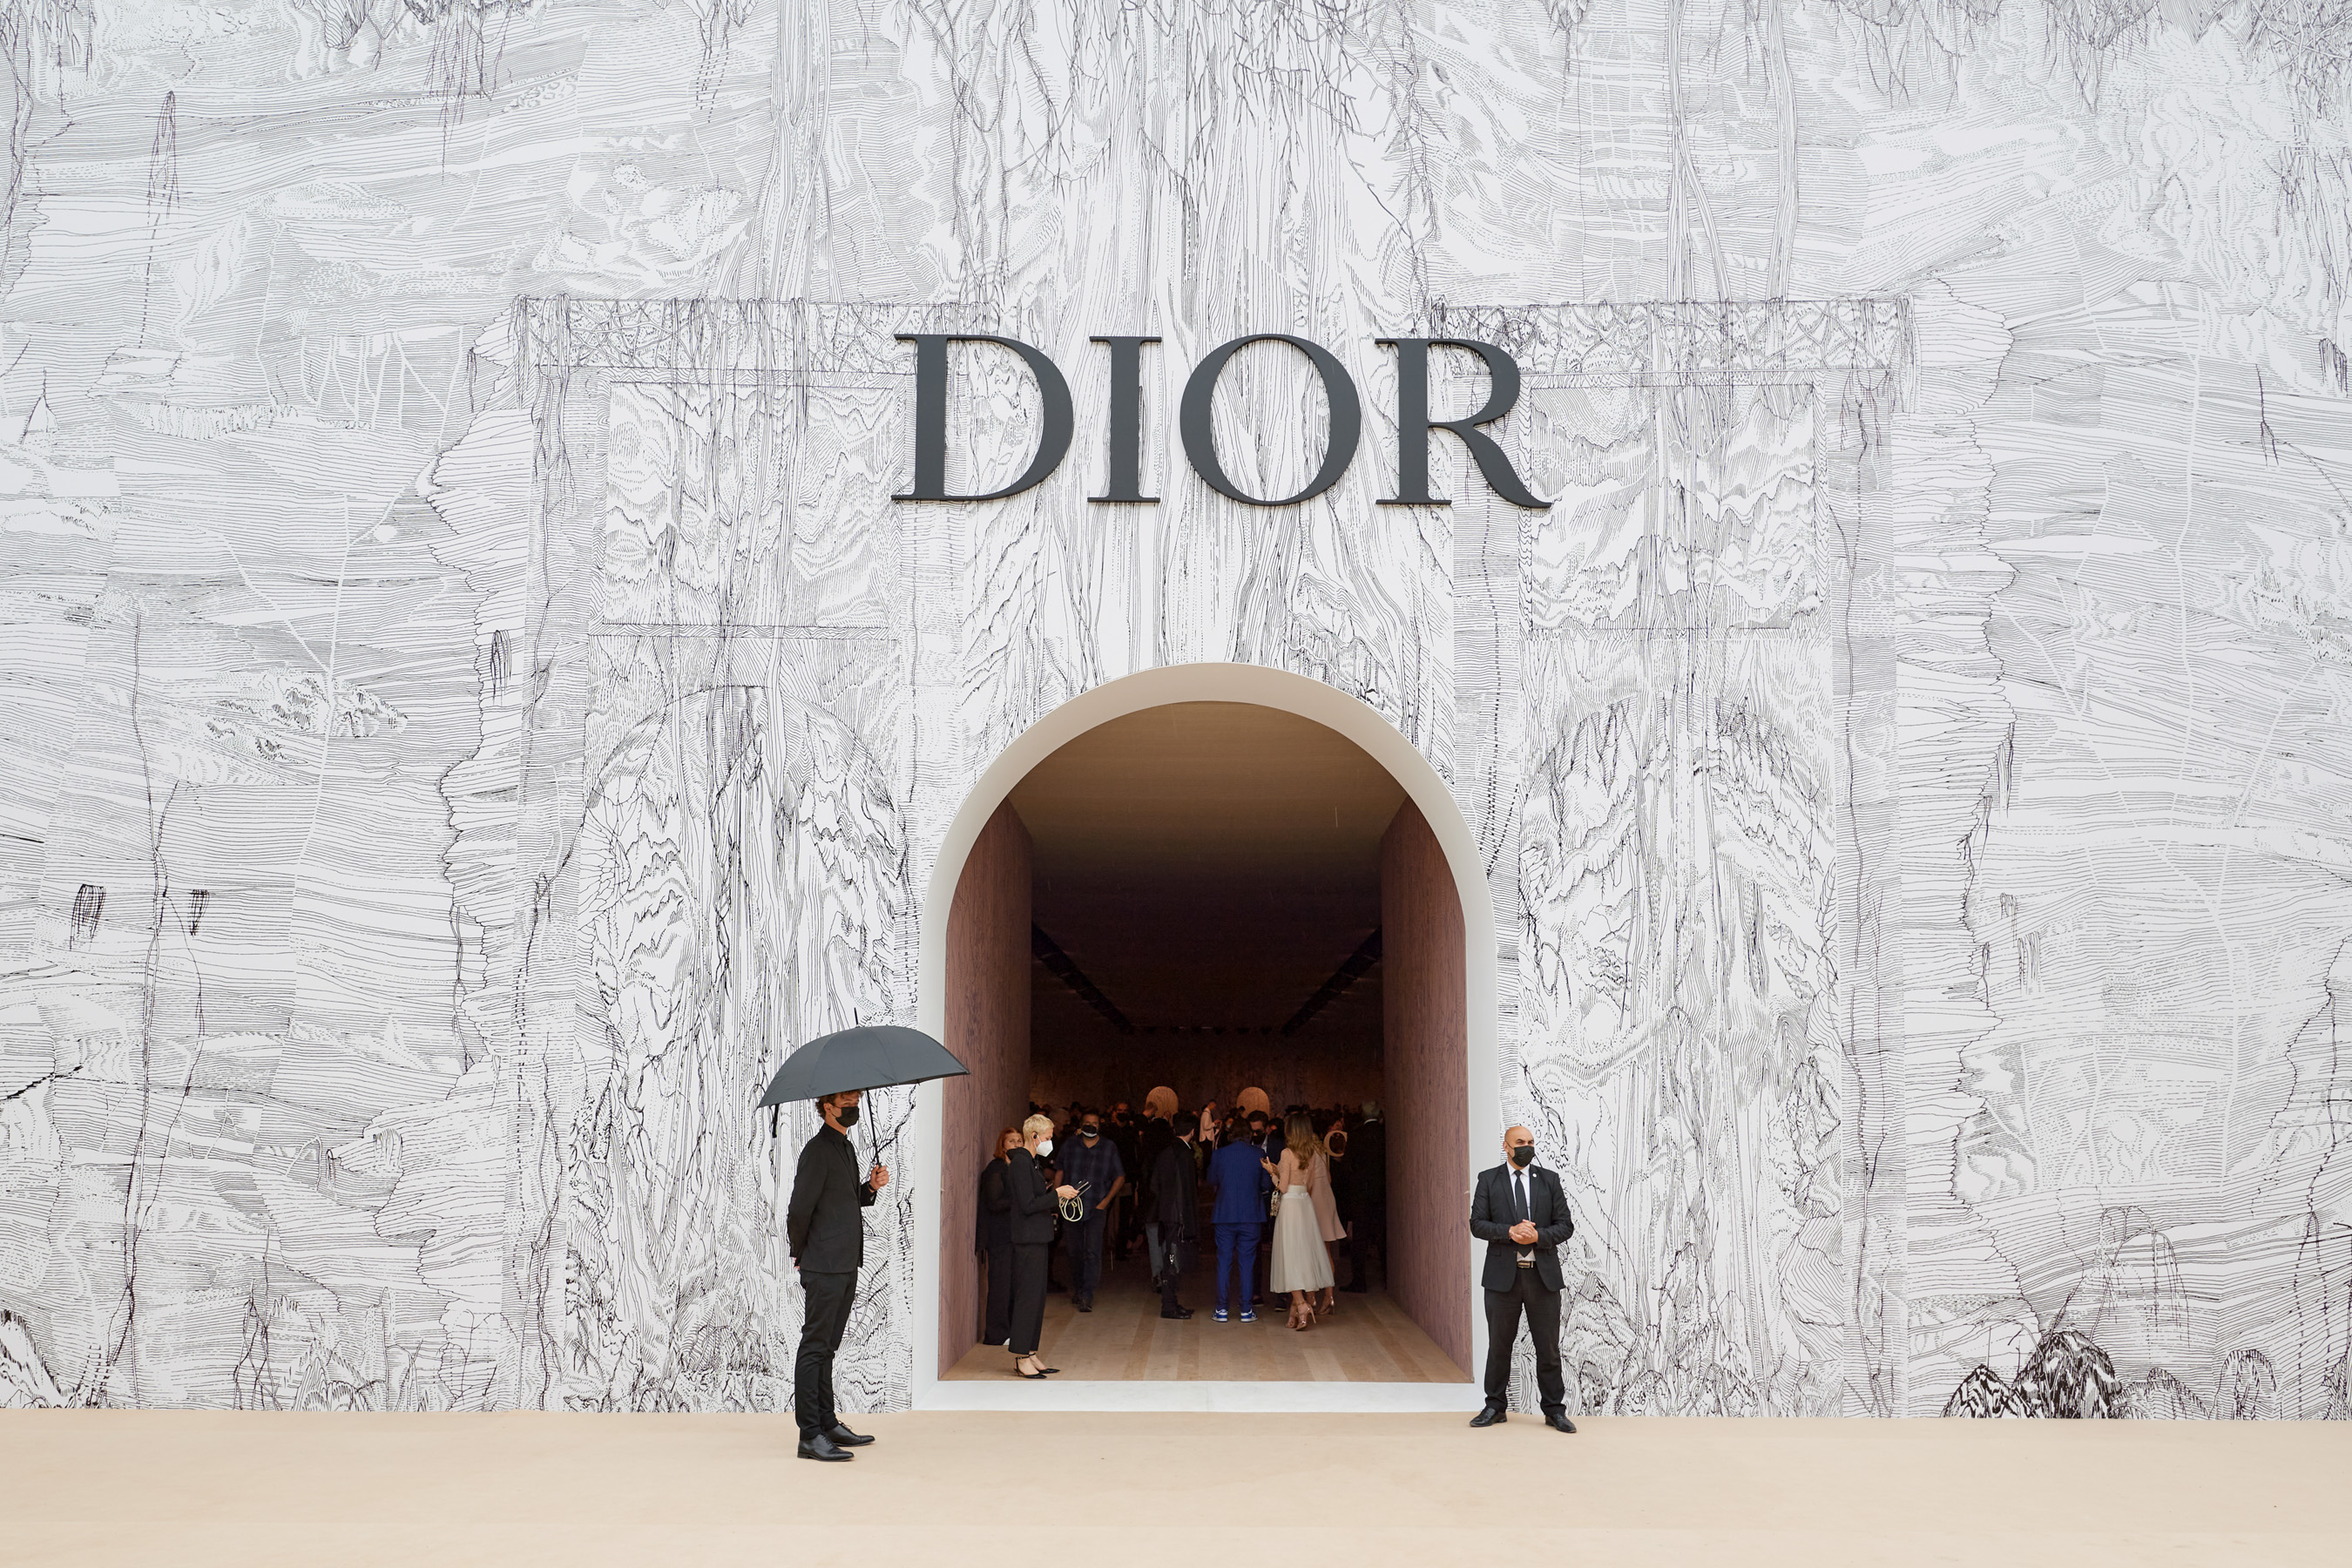 Christian Dior Fall 2021 Couture Atmosphere Fashion Show